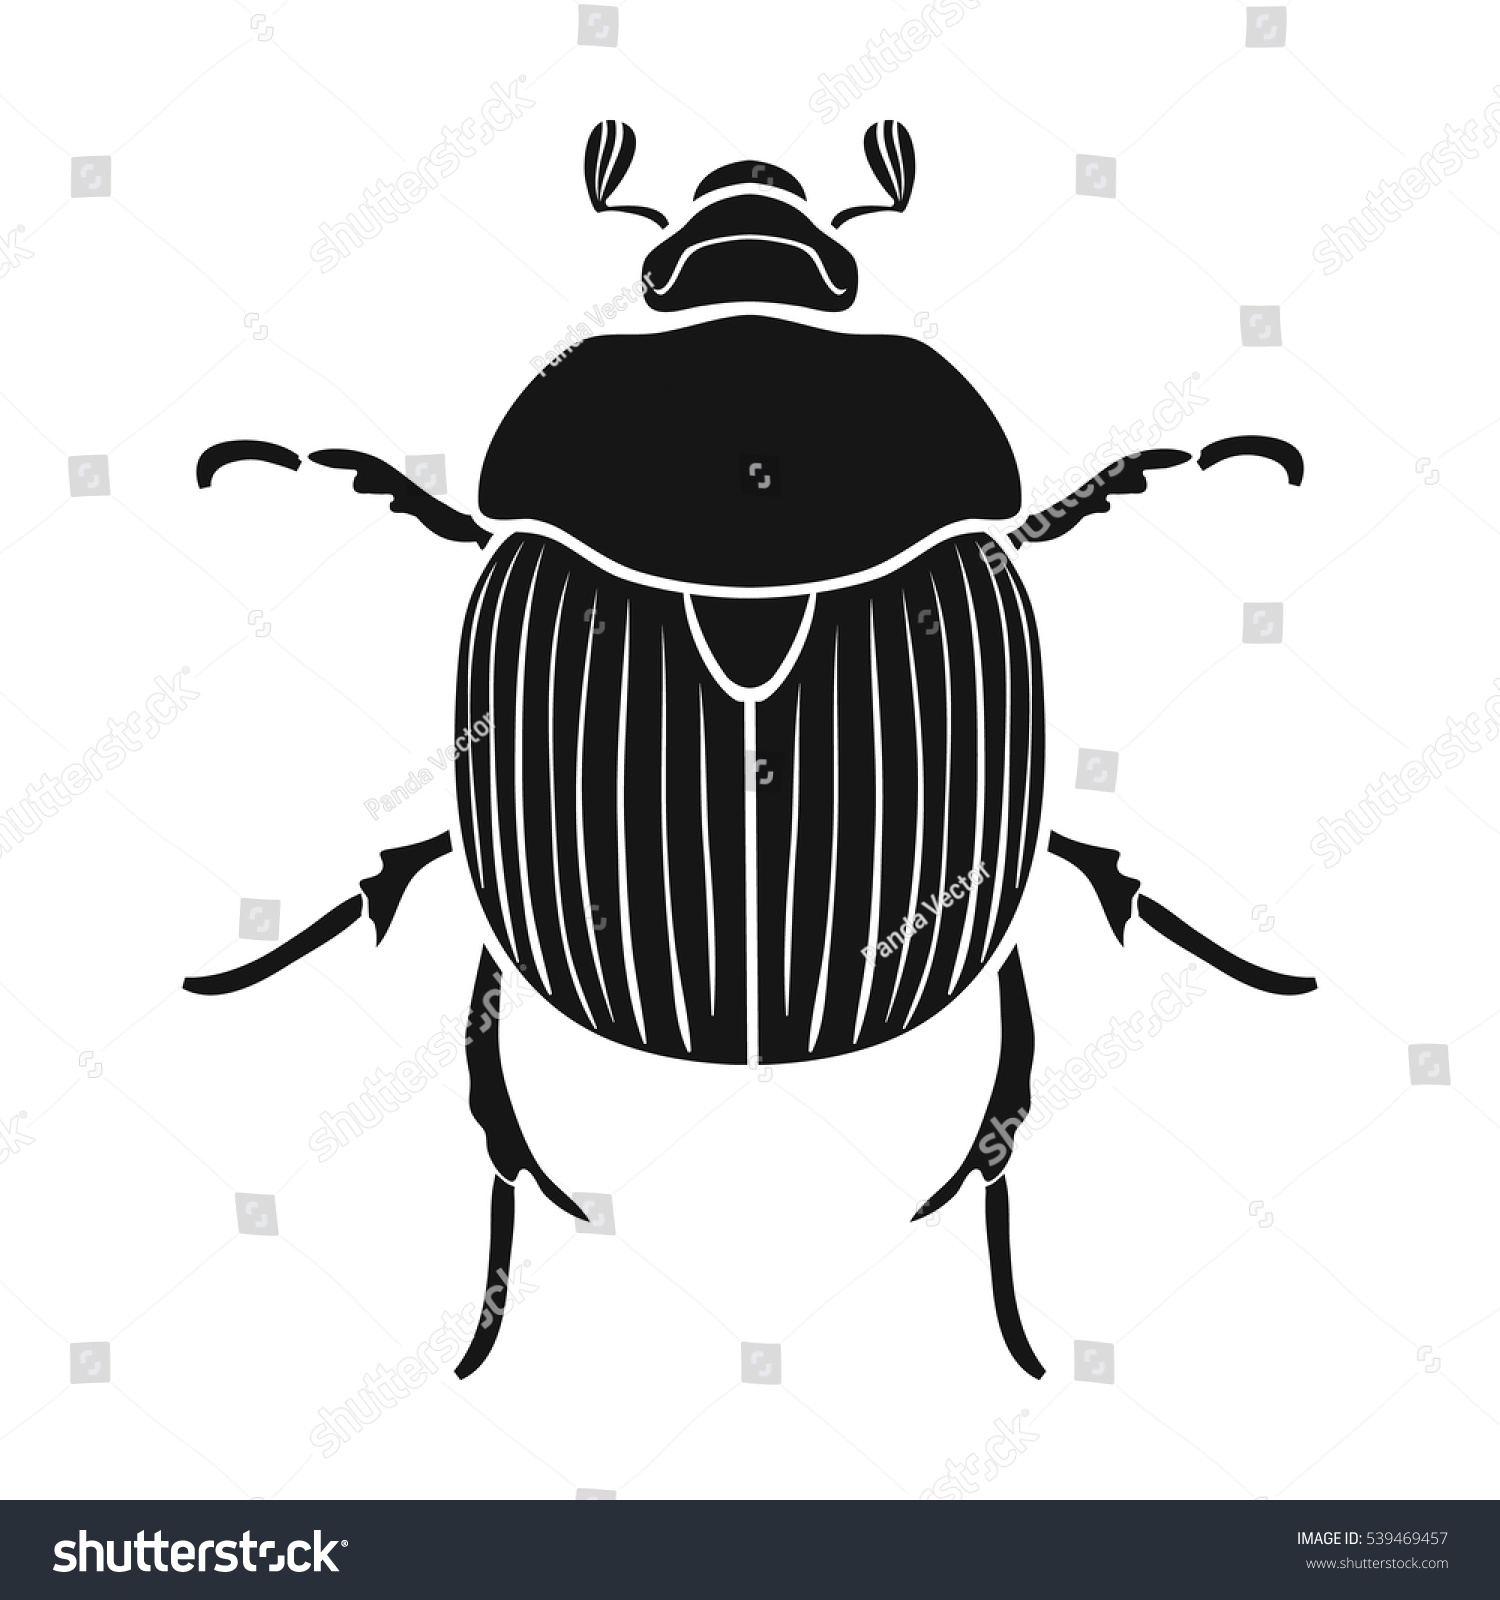 SVG of Dor-beetle icon in black style isolated on white background. Insects symbol stock vector illustration. svg